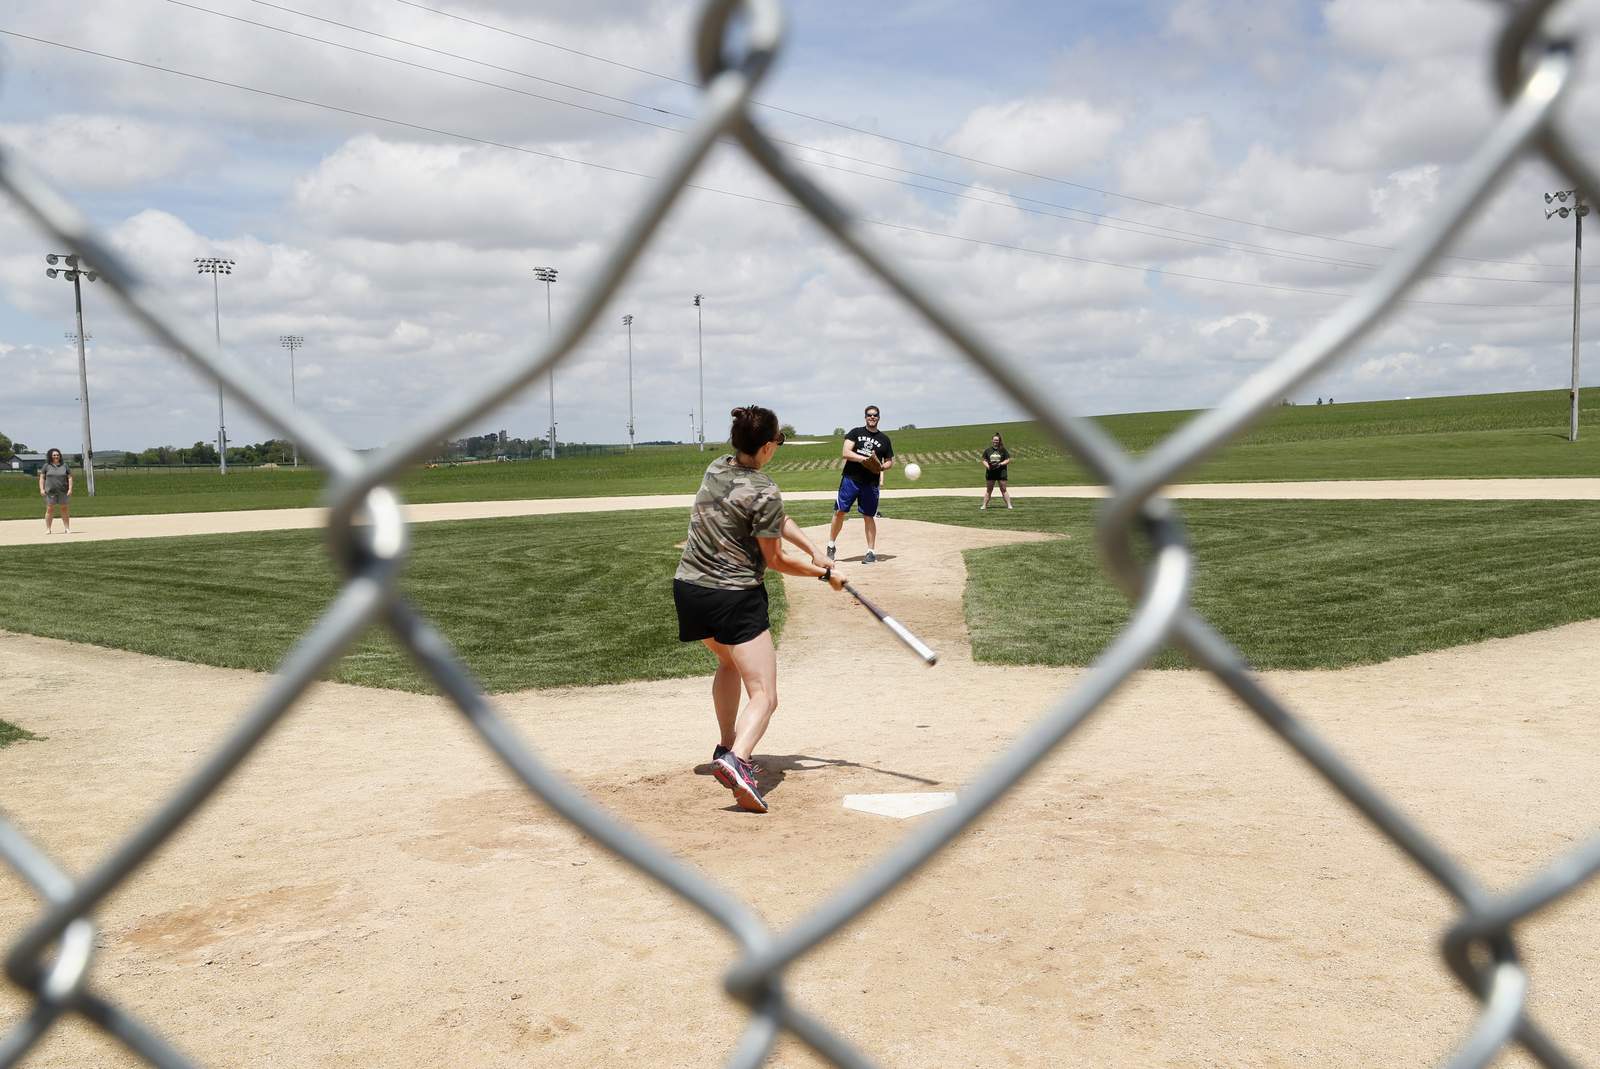 Baseball plans game at Field of Dreams, but will they come?